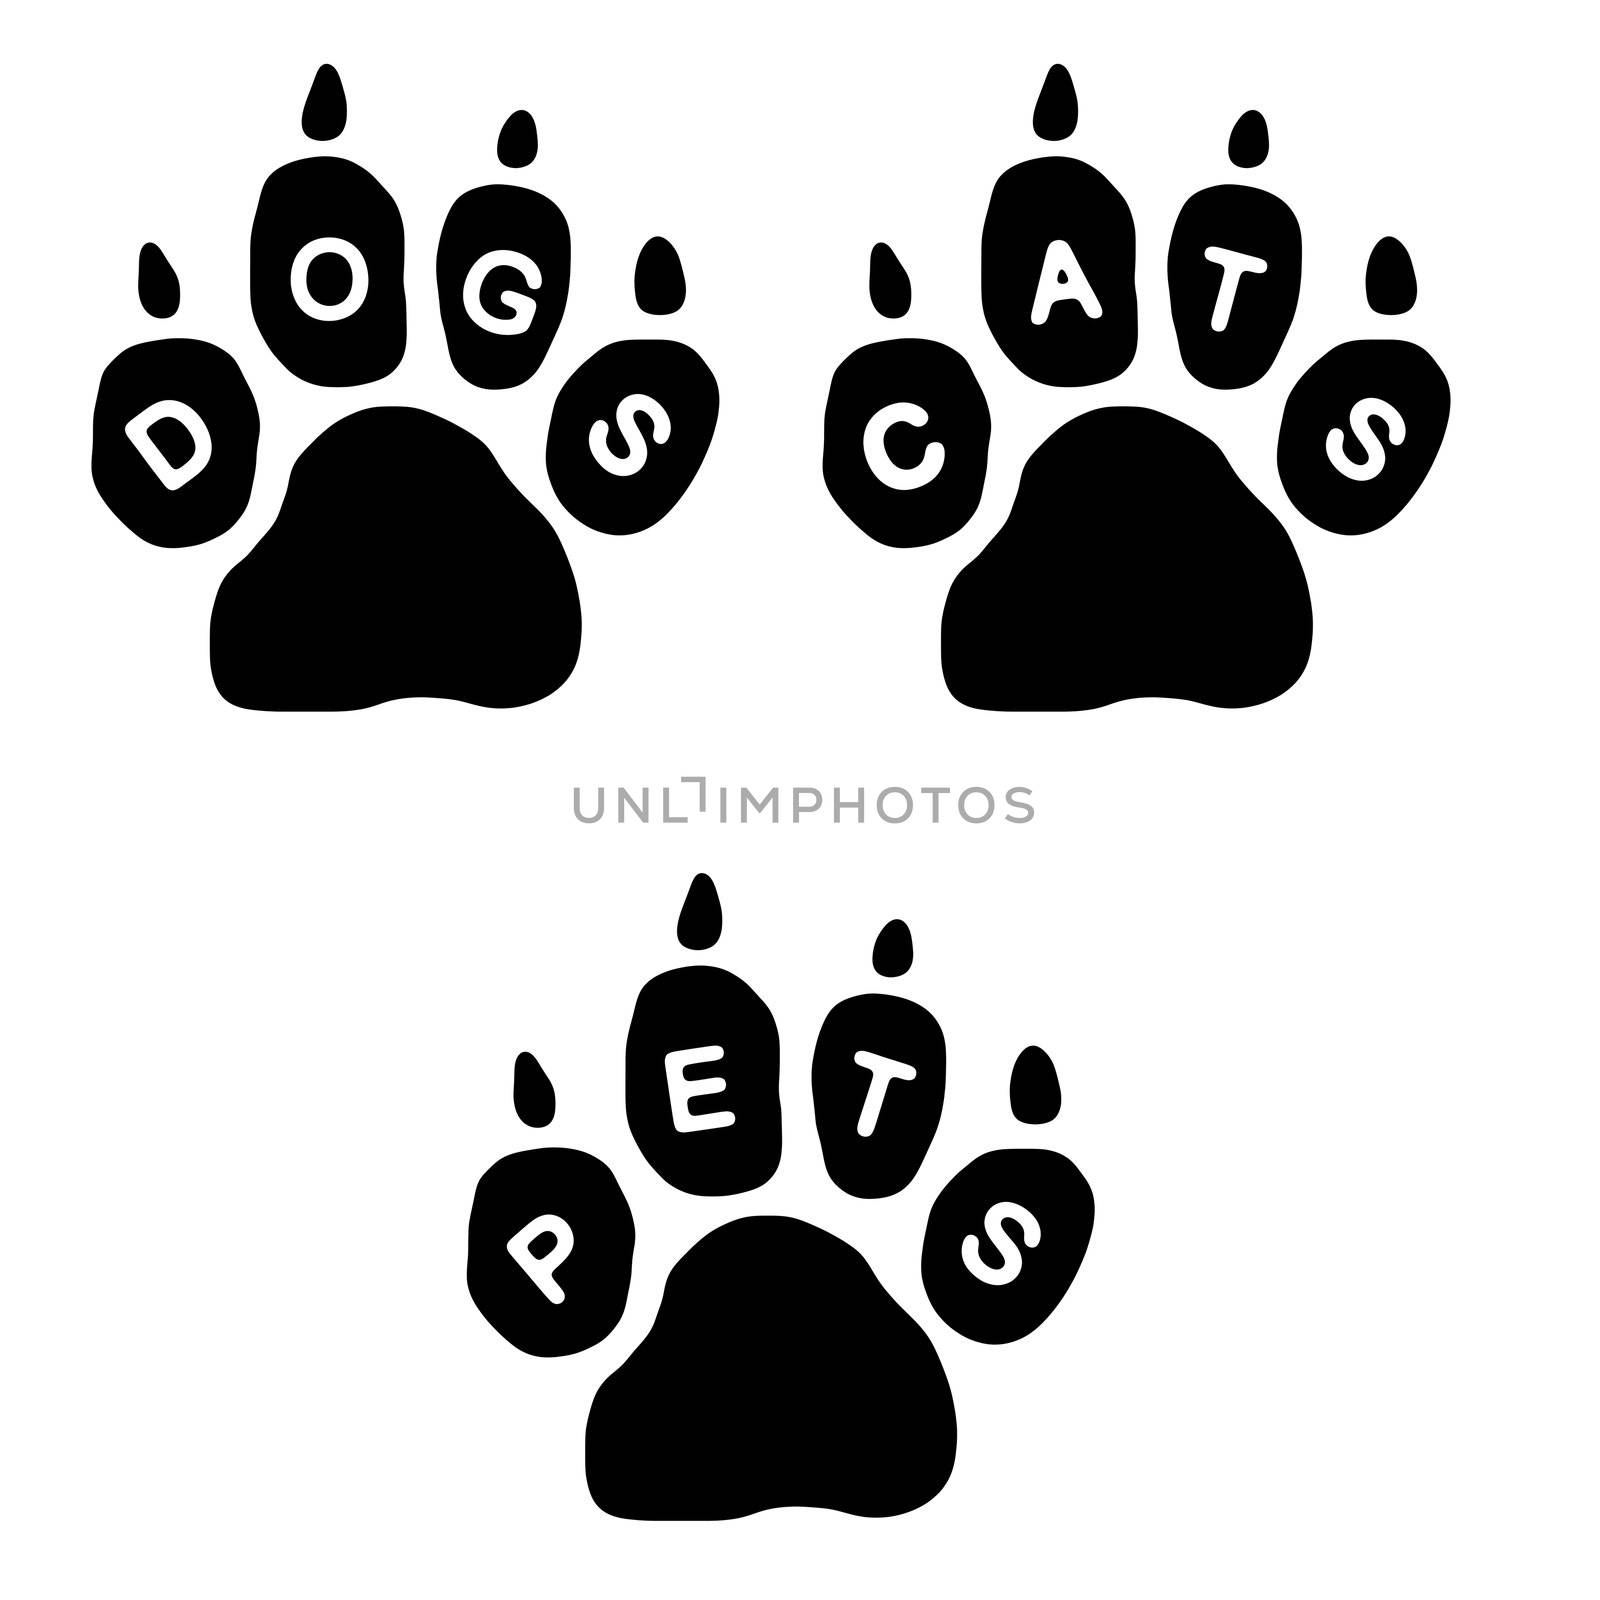 Paws and text by darrenwhittingham